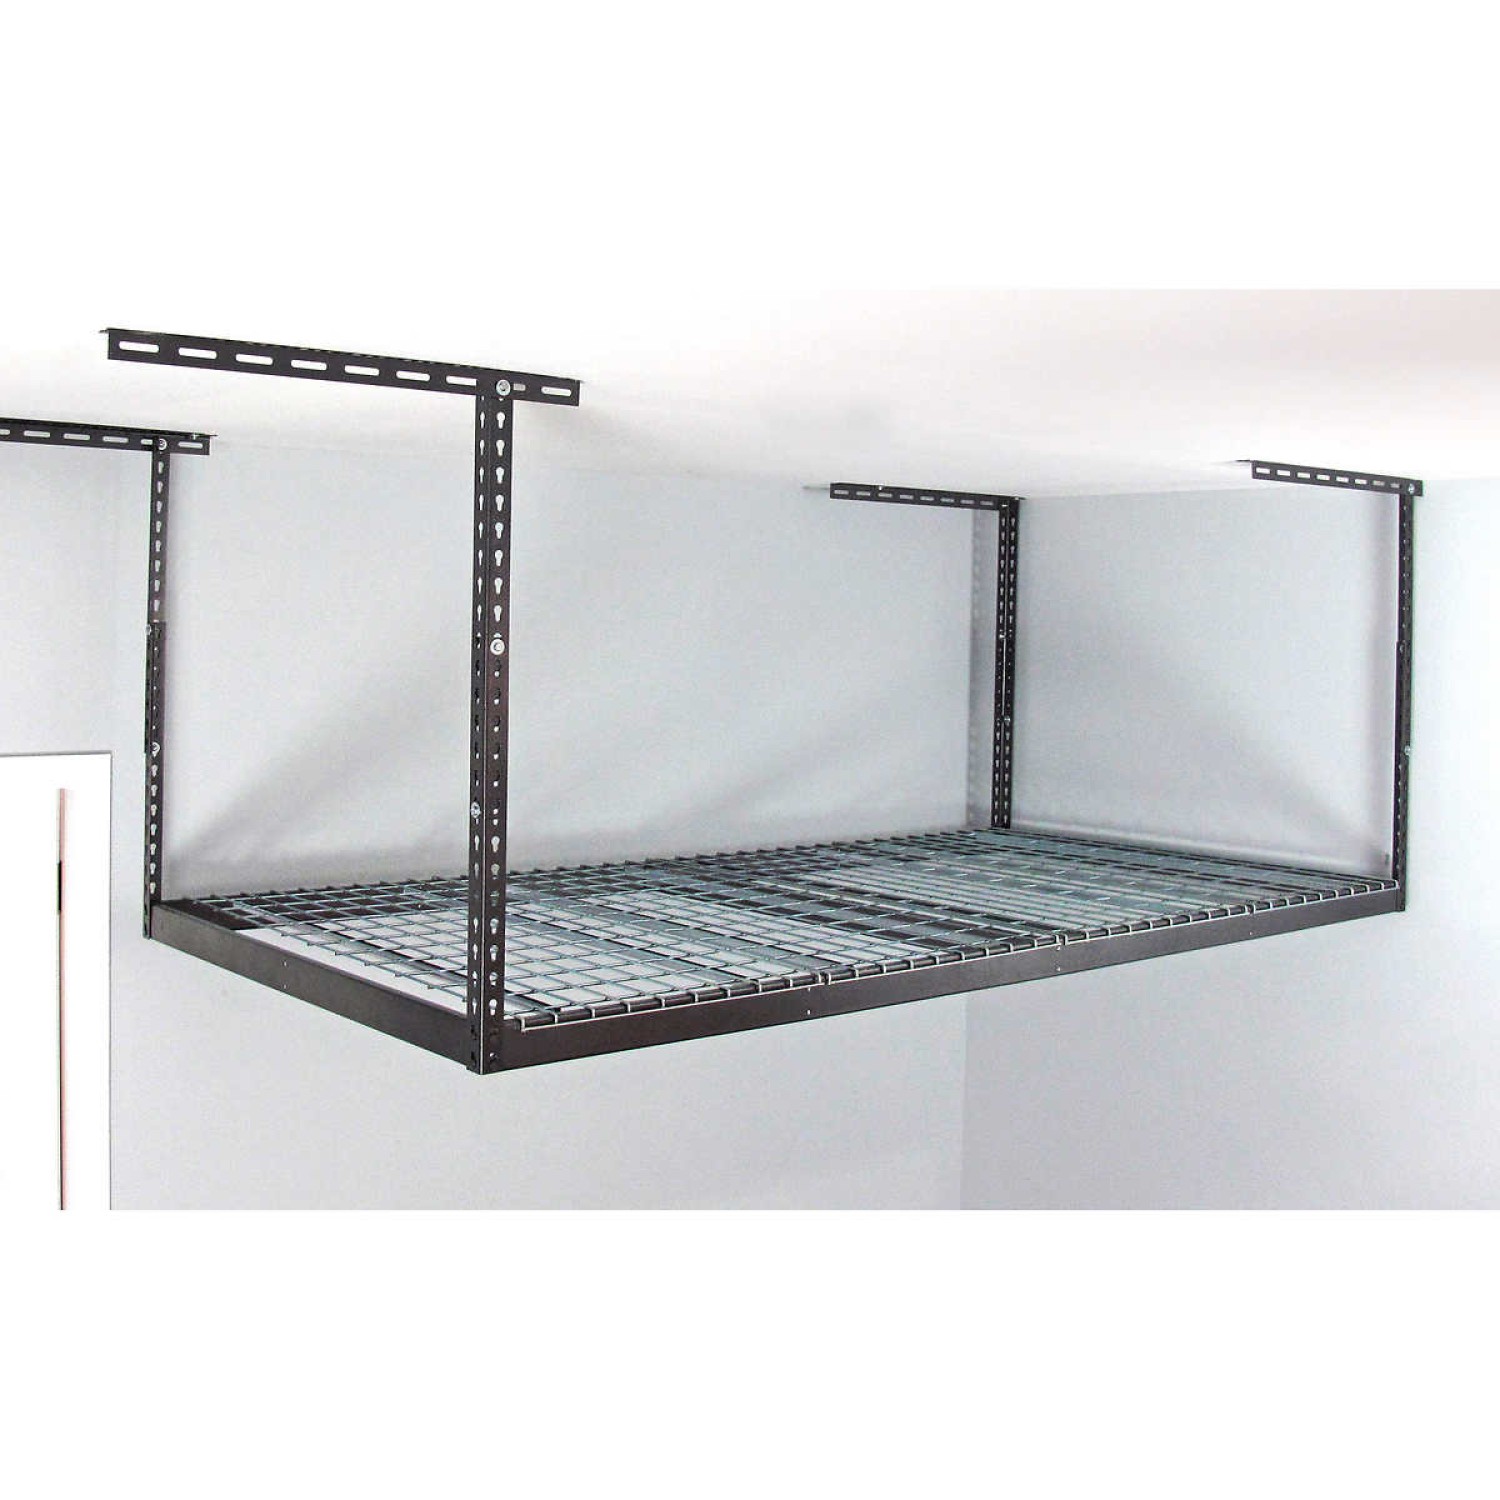 Saferacks 4 Ft X 8 Ft Overhead Garage Storage Rack And Accessories